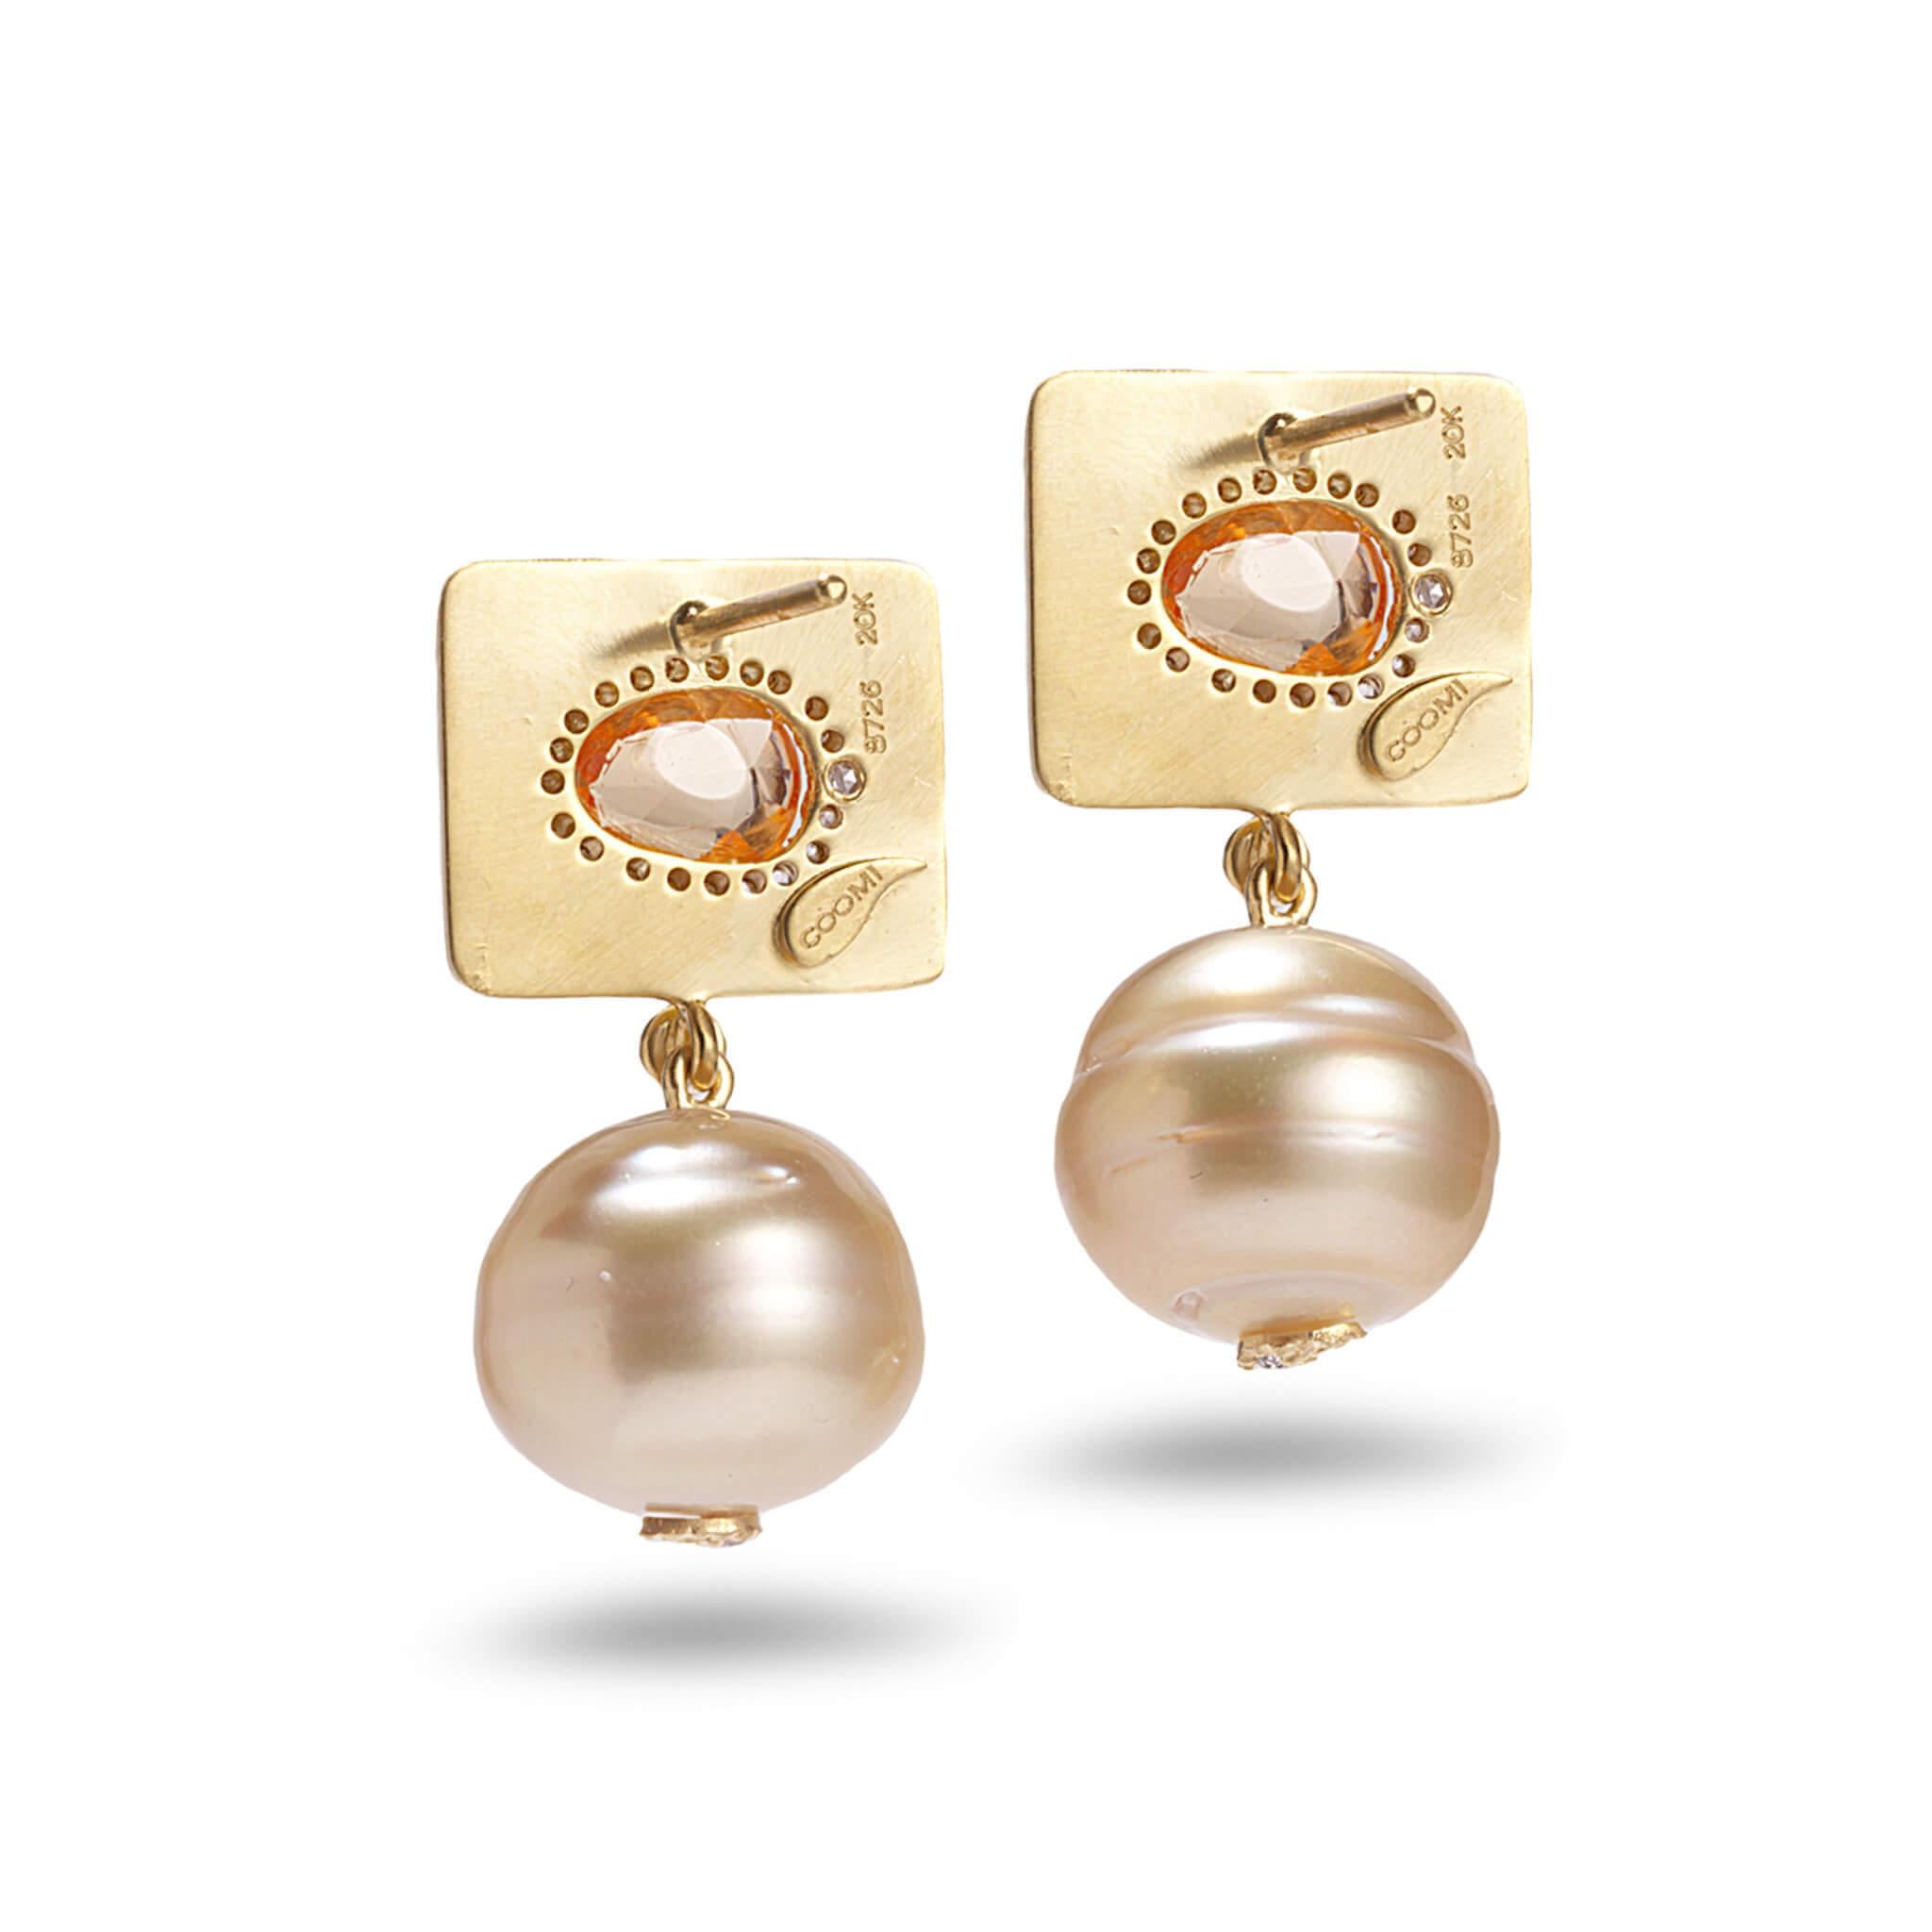 Affinity earrings set in 20K yellow gold with Golden South Sea pearl, 1.69cts orange sapphire, and 0.34cts diamond.
